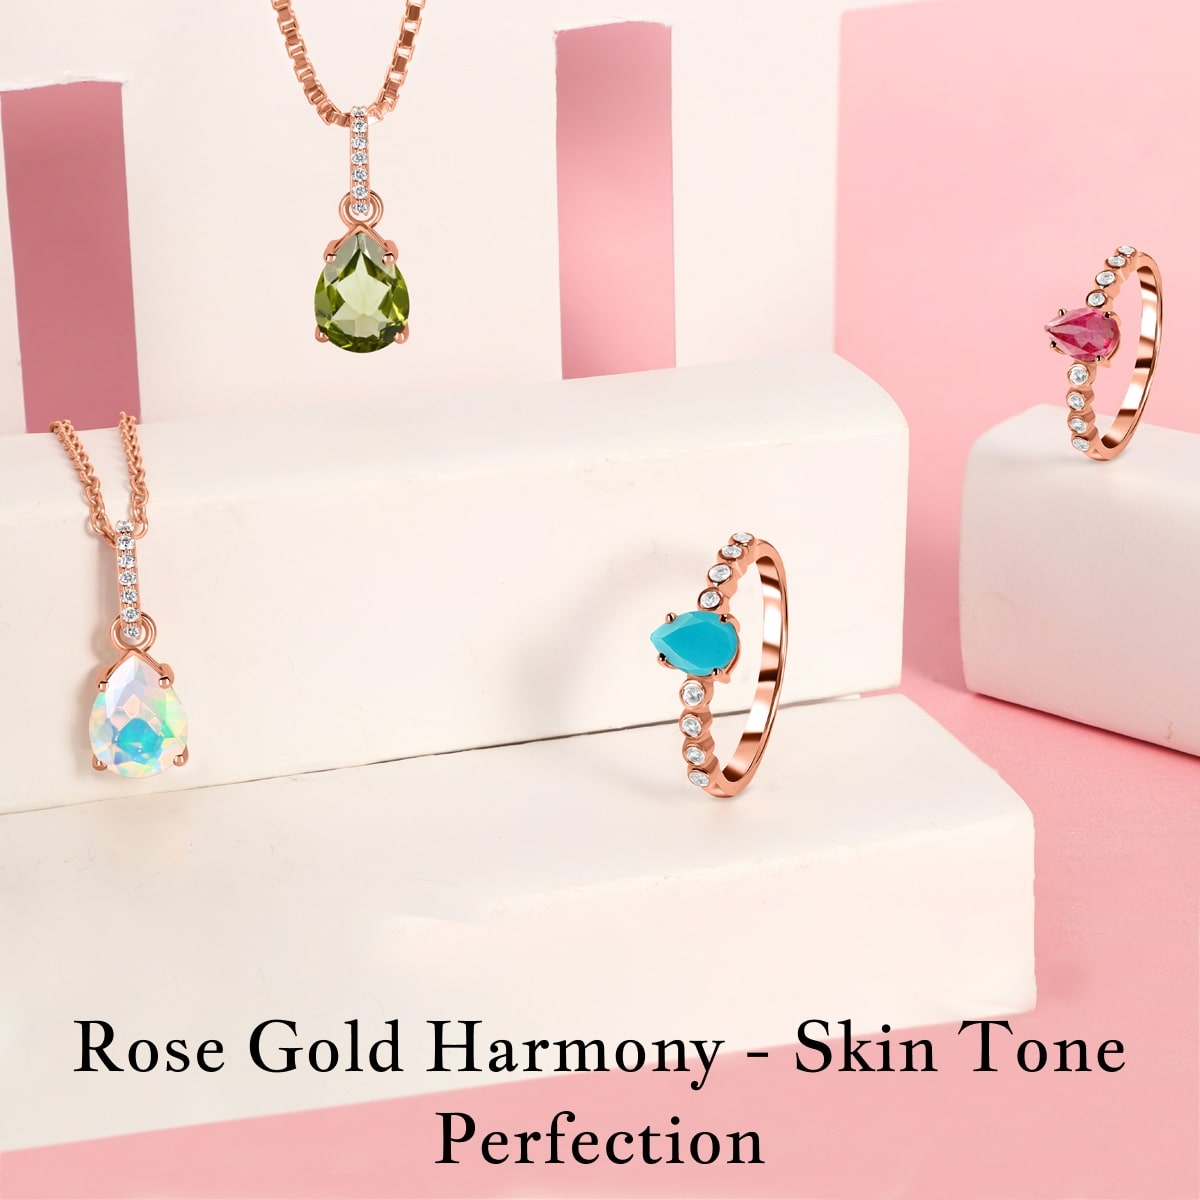 Rose Gold: A Match For Every Skin Tone